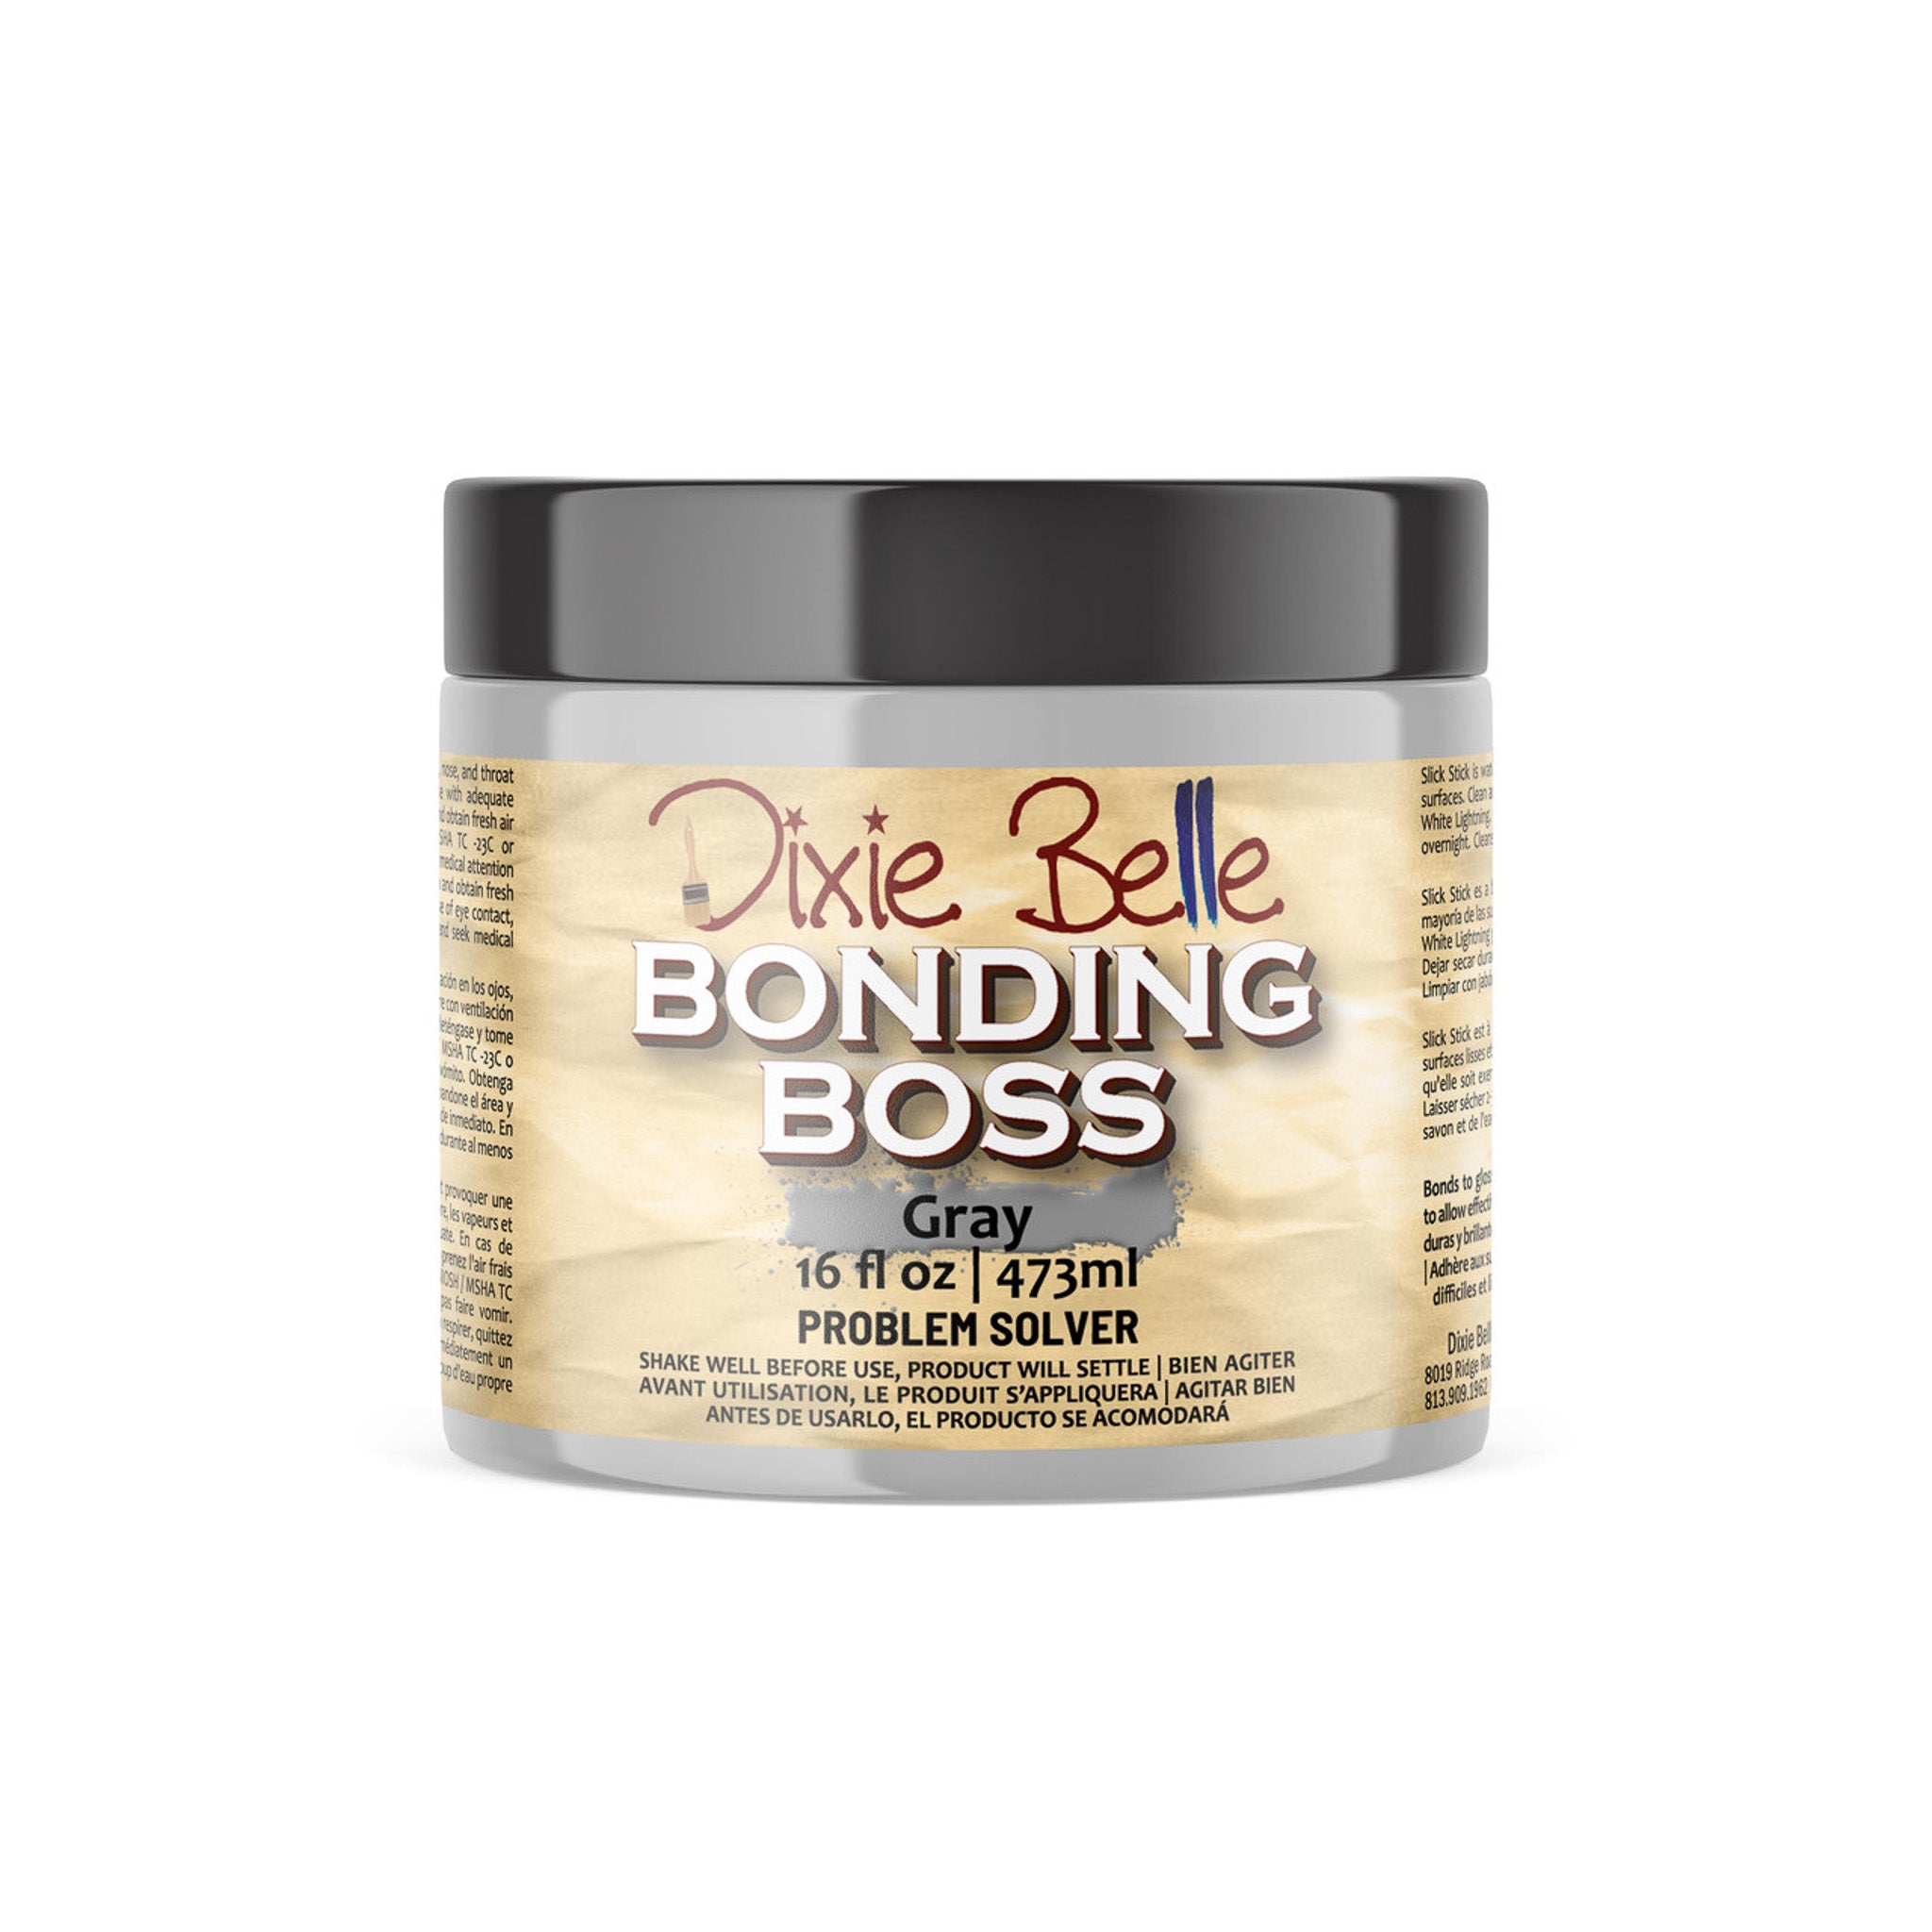 A 16oz container of Dixie Belle's Bonding Boss in Gray is against a white background.